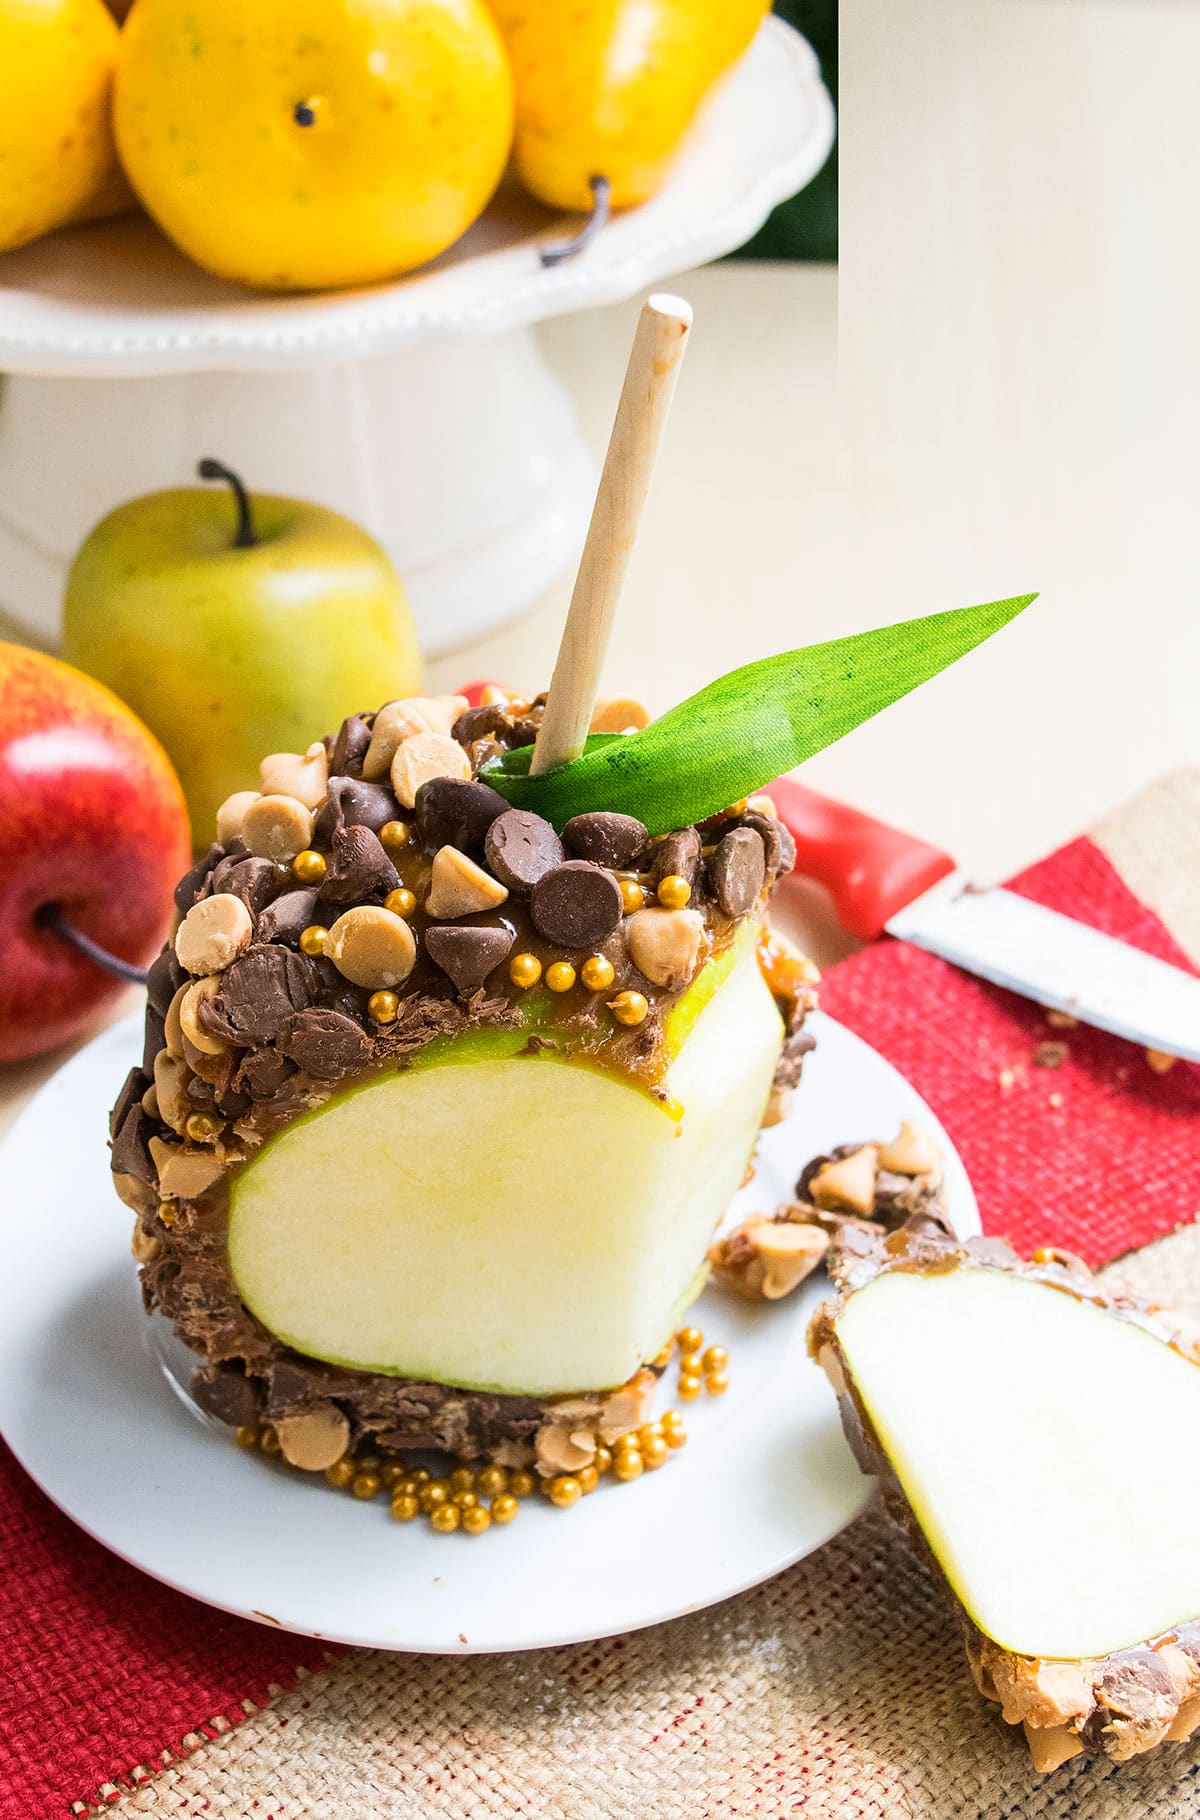 Sliced Chocolate Apples on White Dish